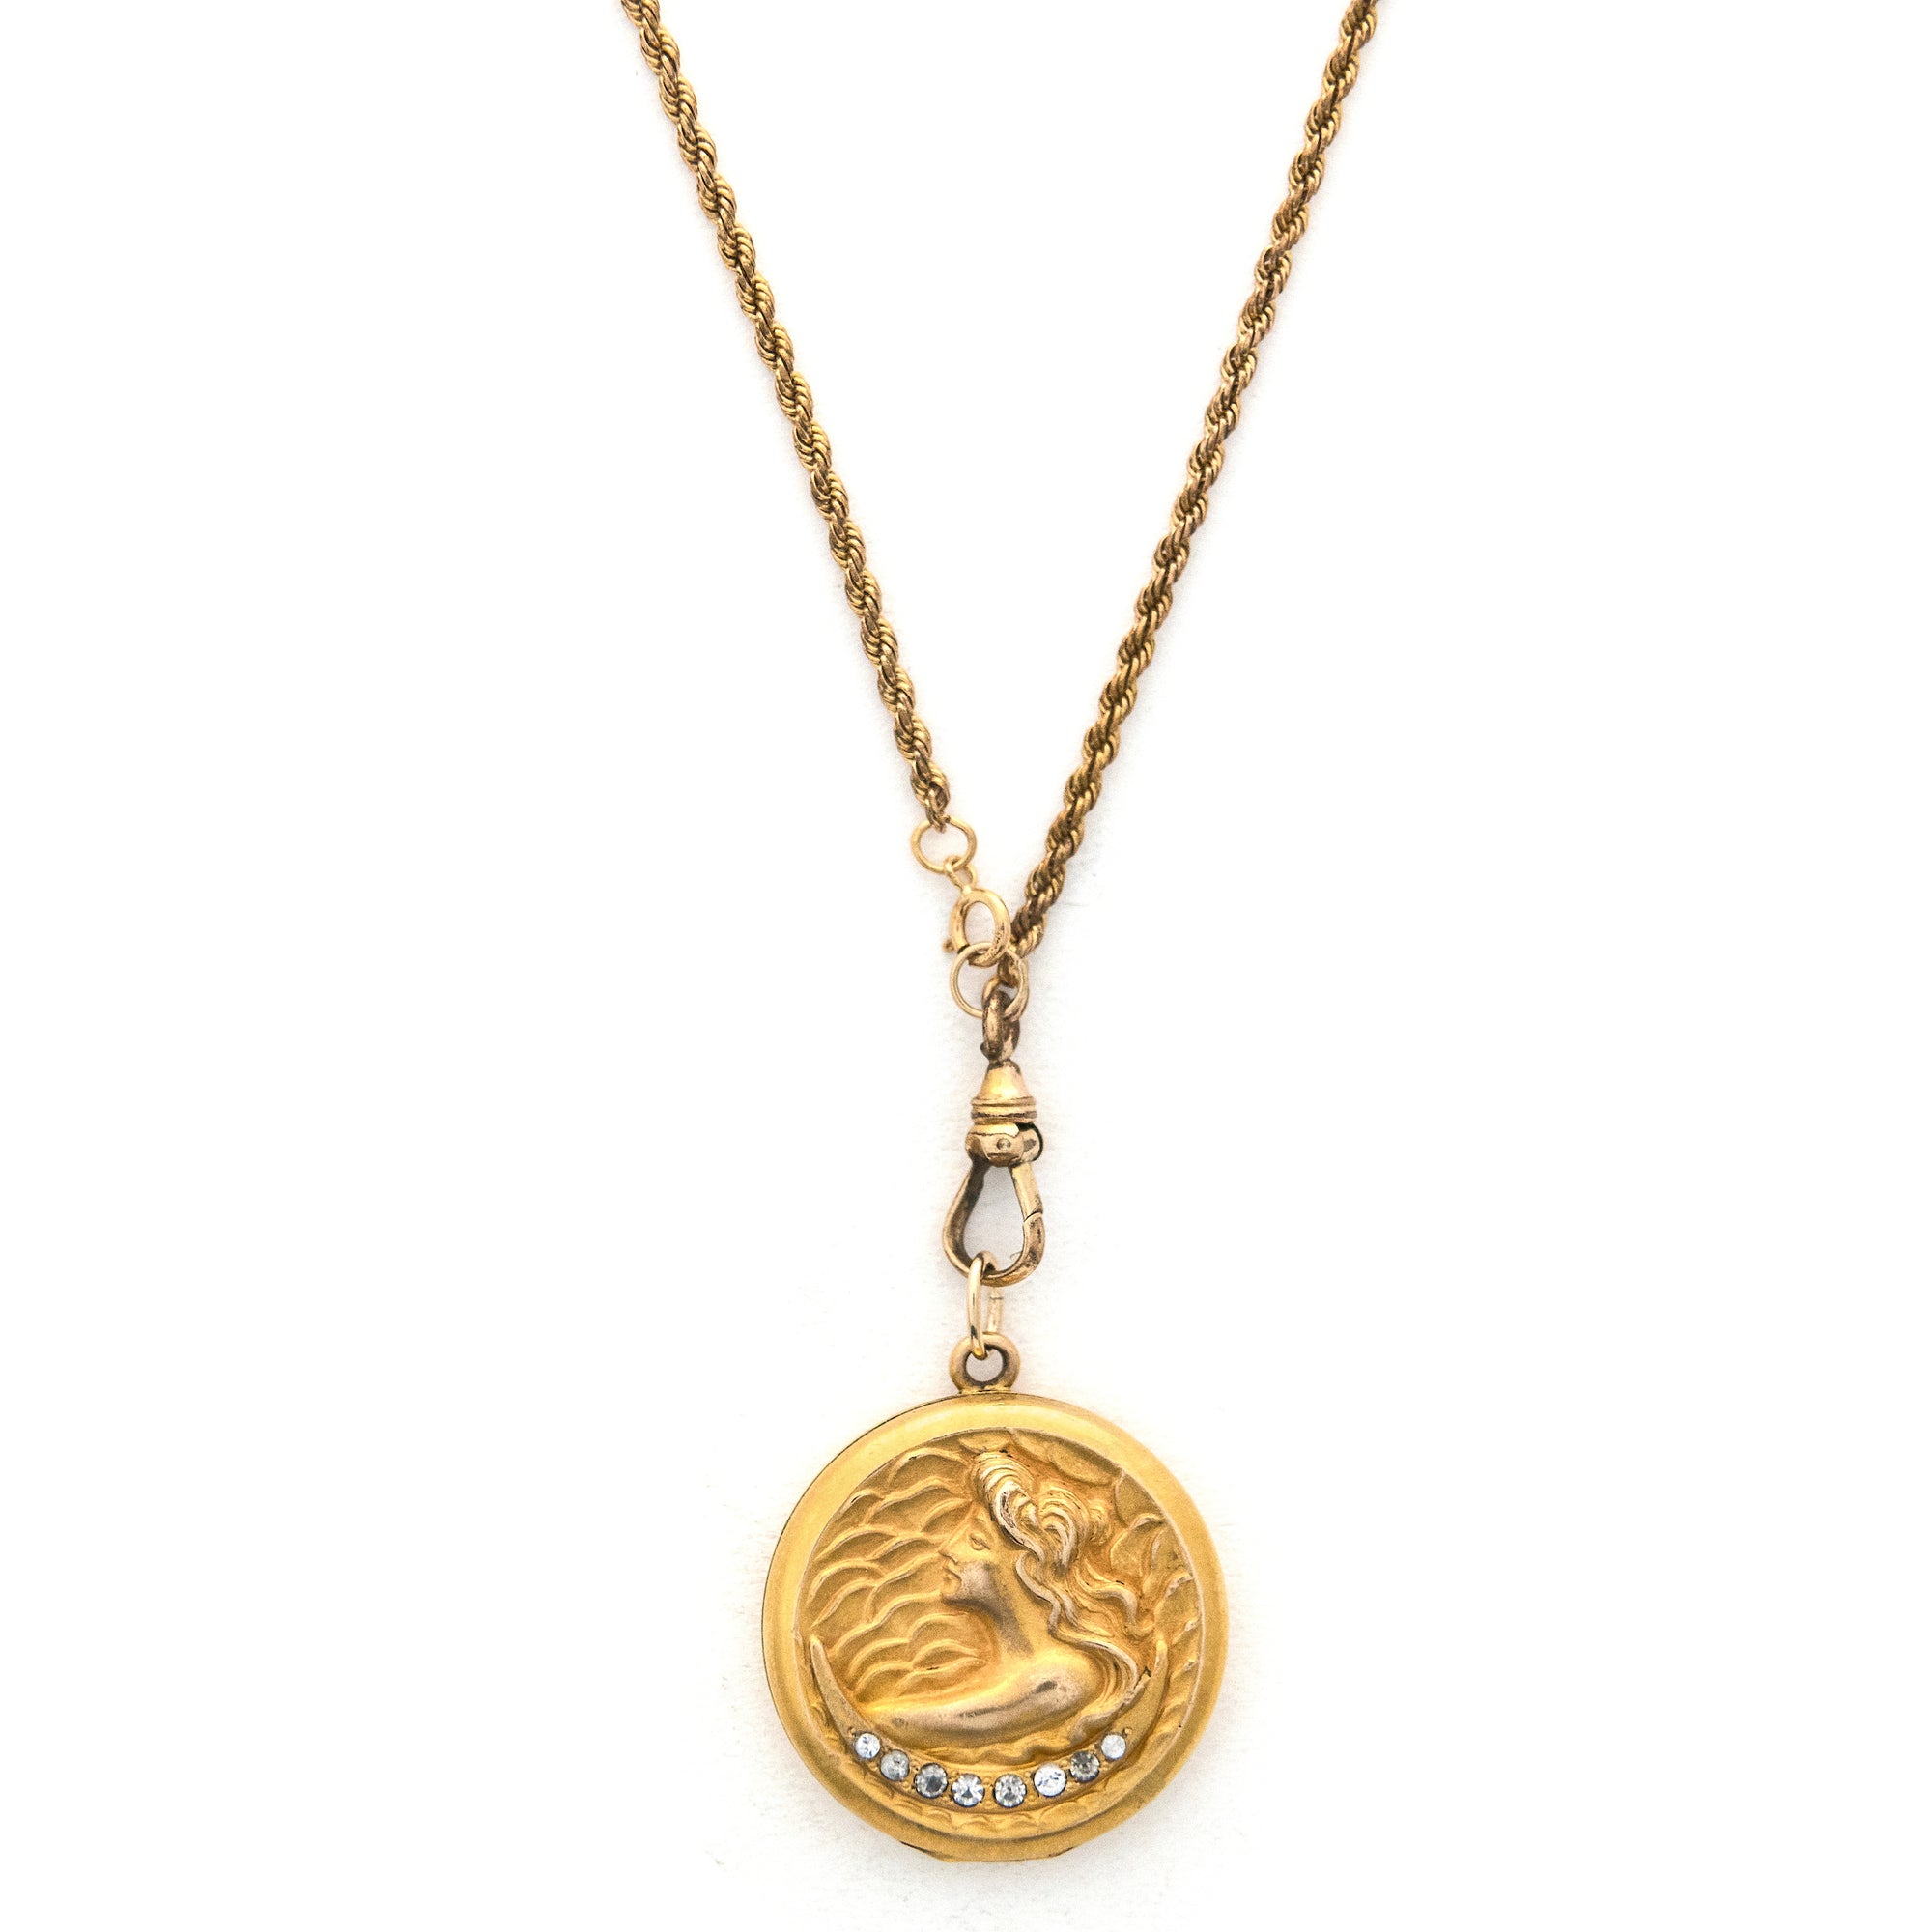 Tidal Goddess Antique Locket, gold fill locket with white paste stone crescent moon and woman in profile with waves, perfect for holding pictures and photos, front view